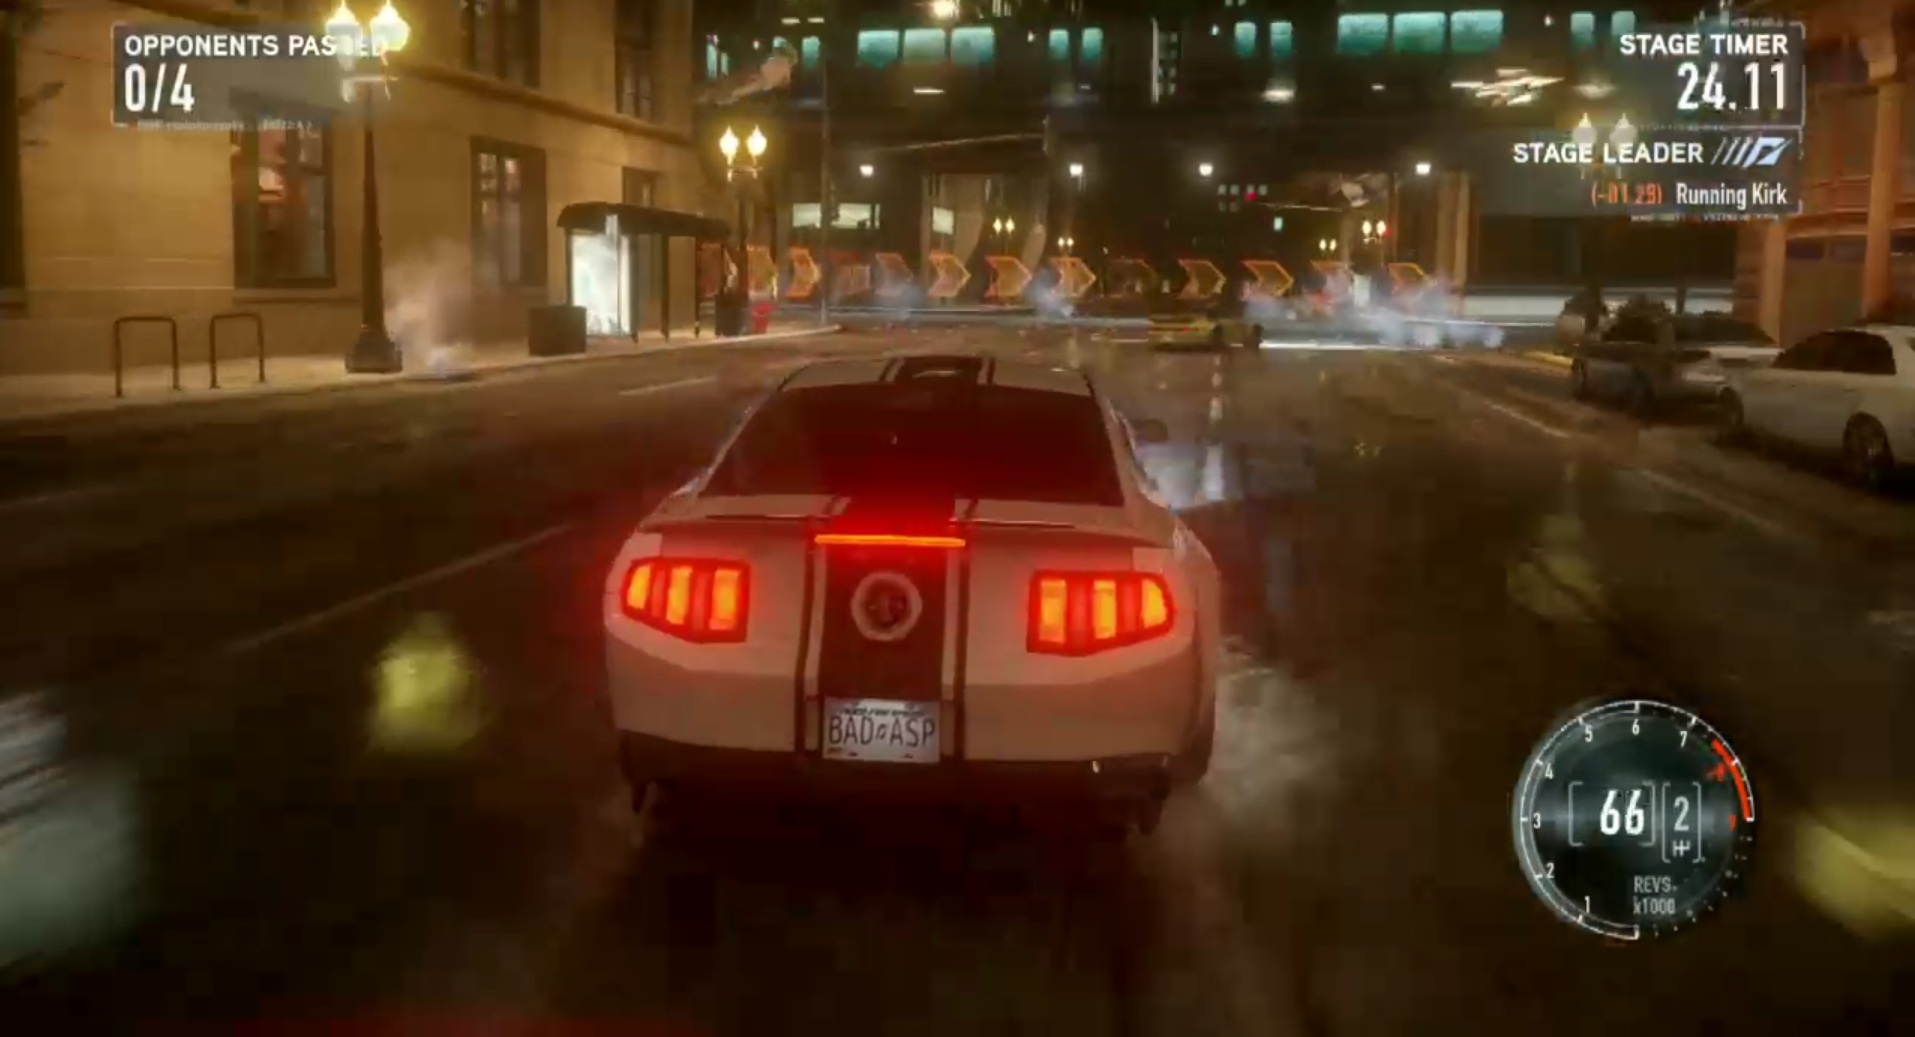 Need for Speed: The Run - IGN